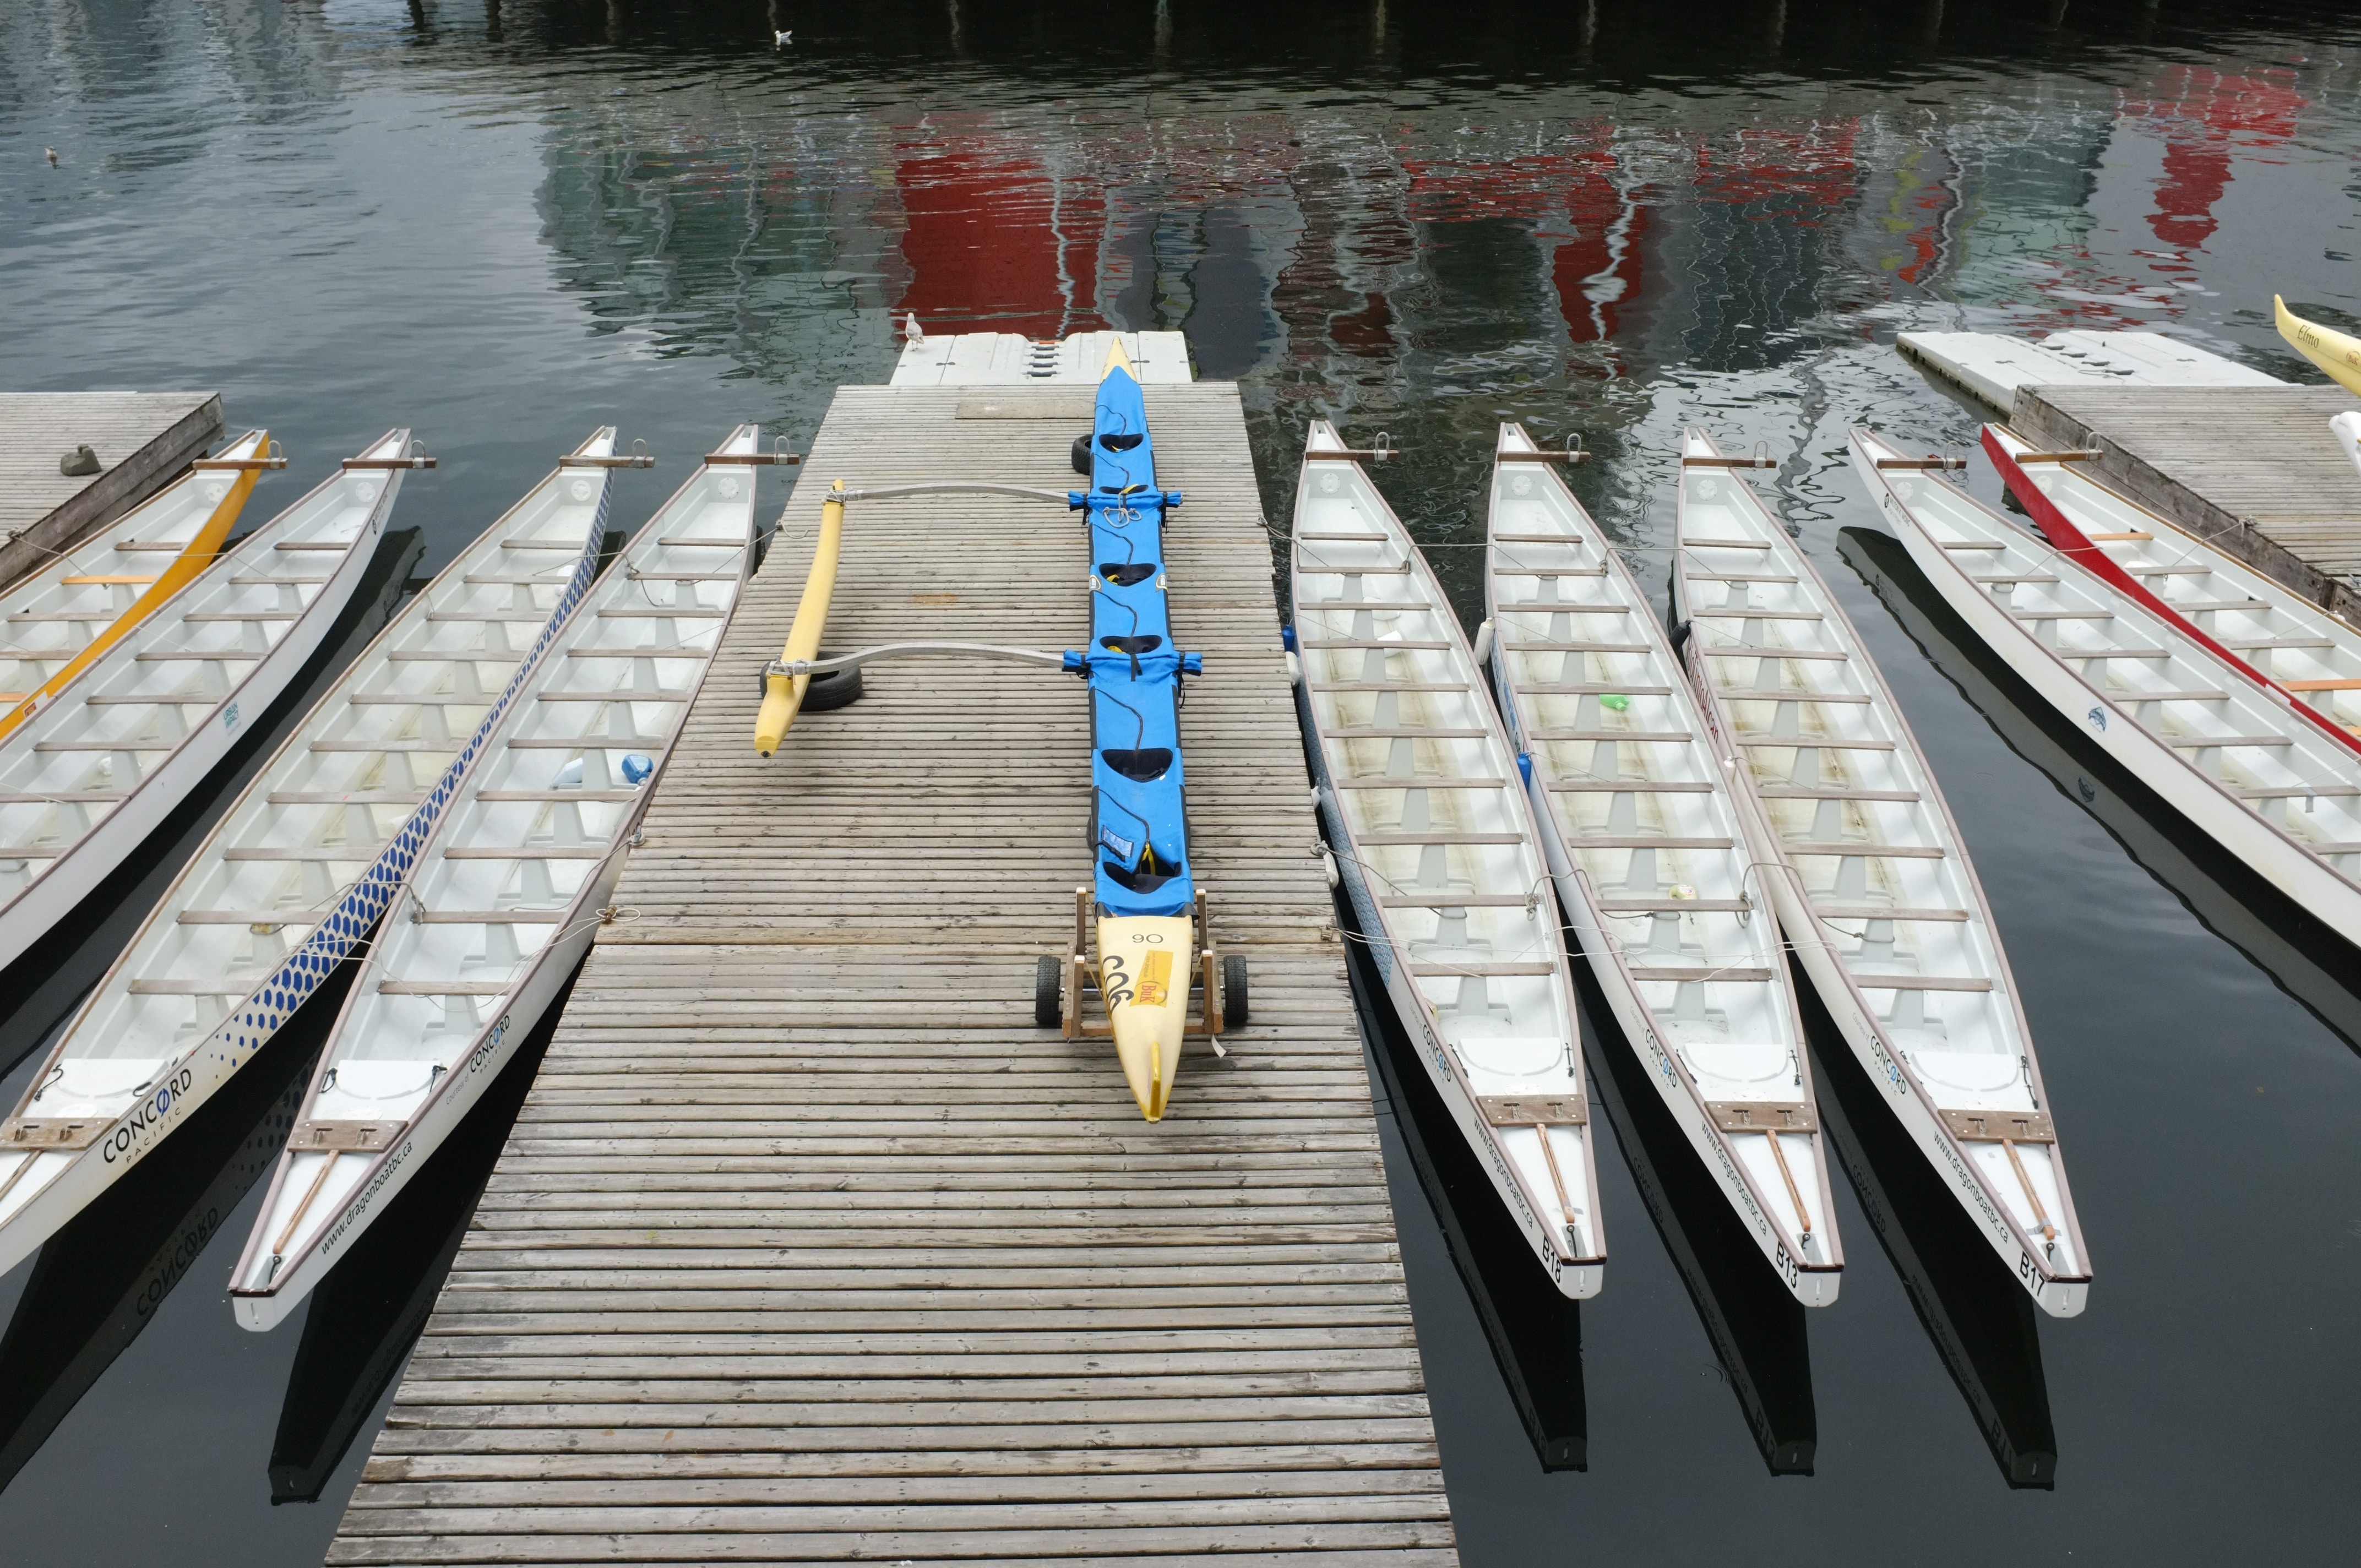 9 long dragon boats sitting empty in the water next to a dock